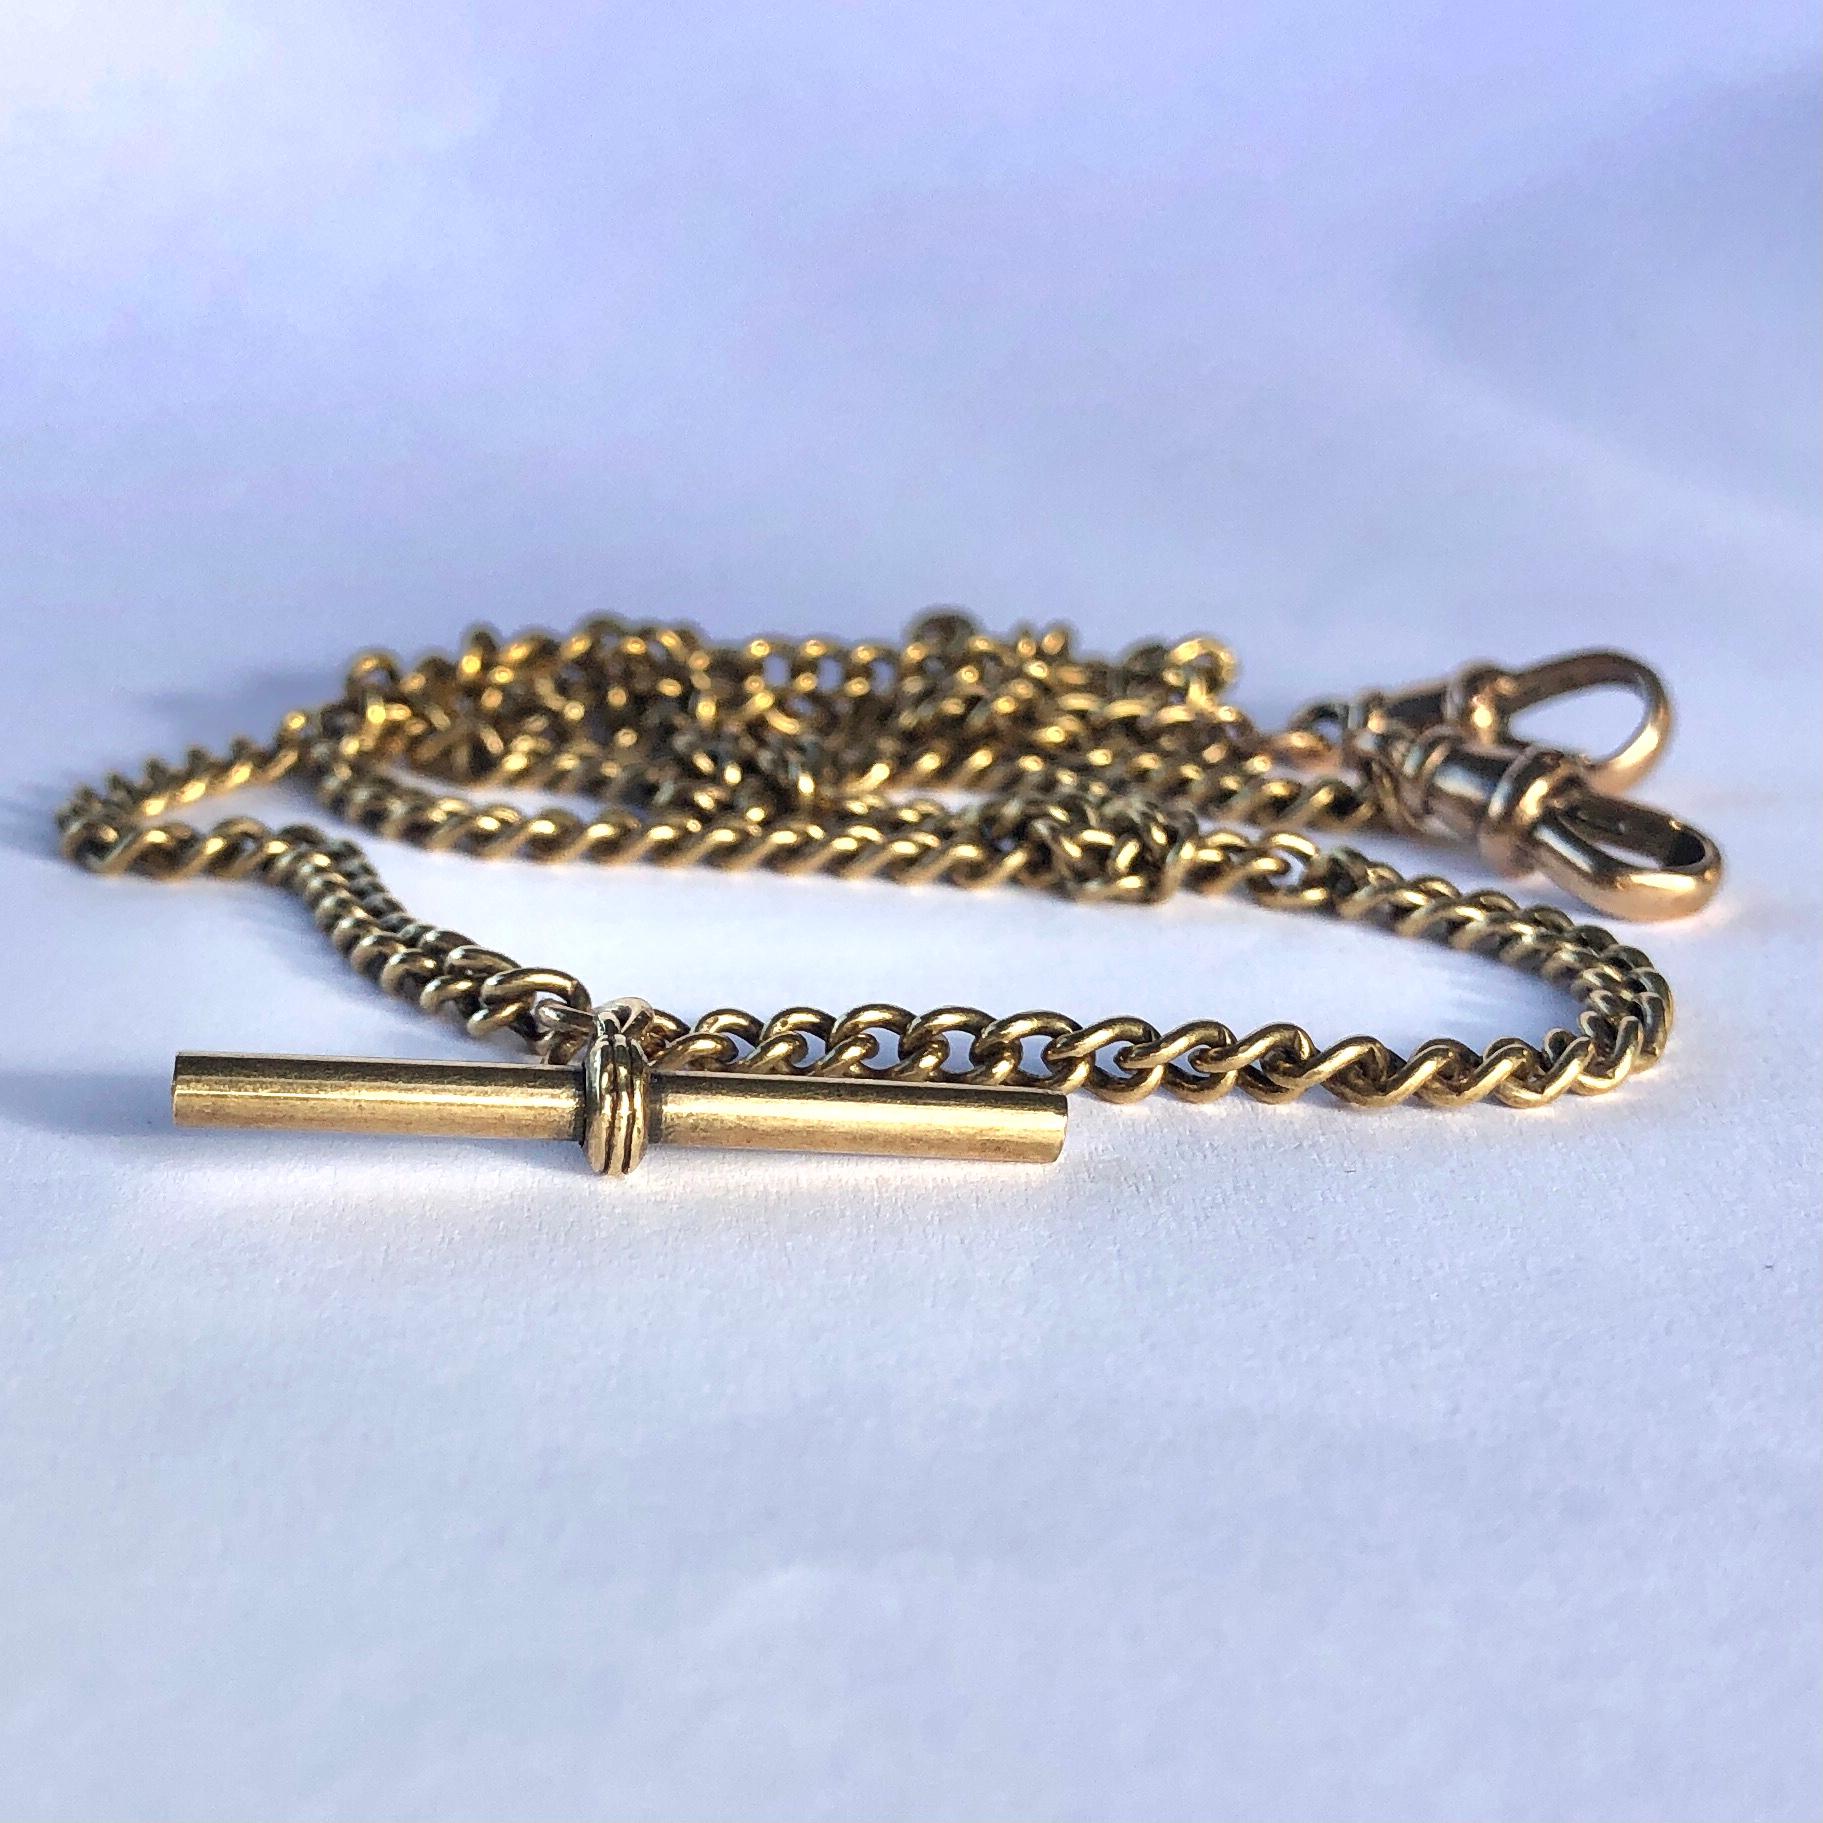 This Albert is the perfect item for a gents wardrobe or could even be used as a necklace. The chain has a dog clip either end and at the centre there is a t-bar. 

Length: 51.5cm
Chain Width: 2.5mm 

Weight: 17.7g
